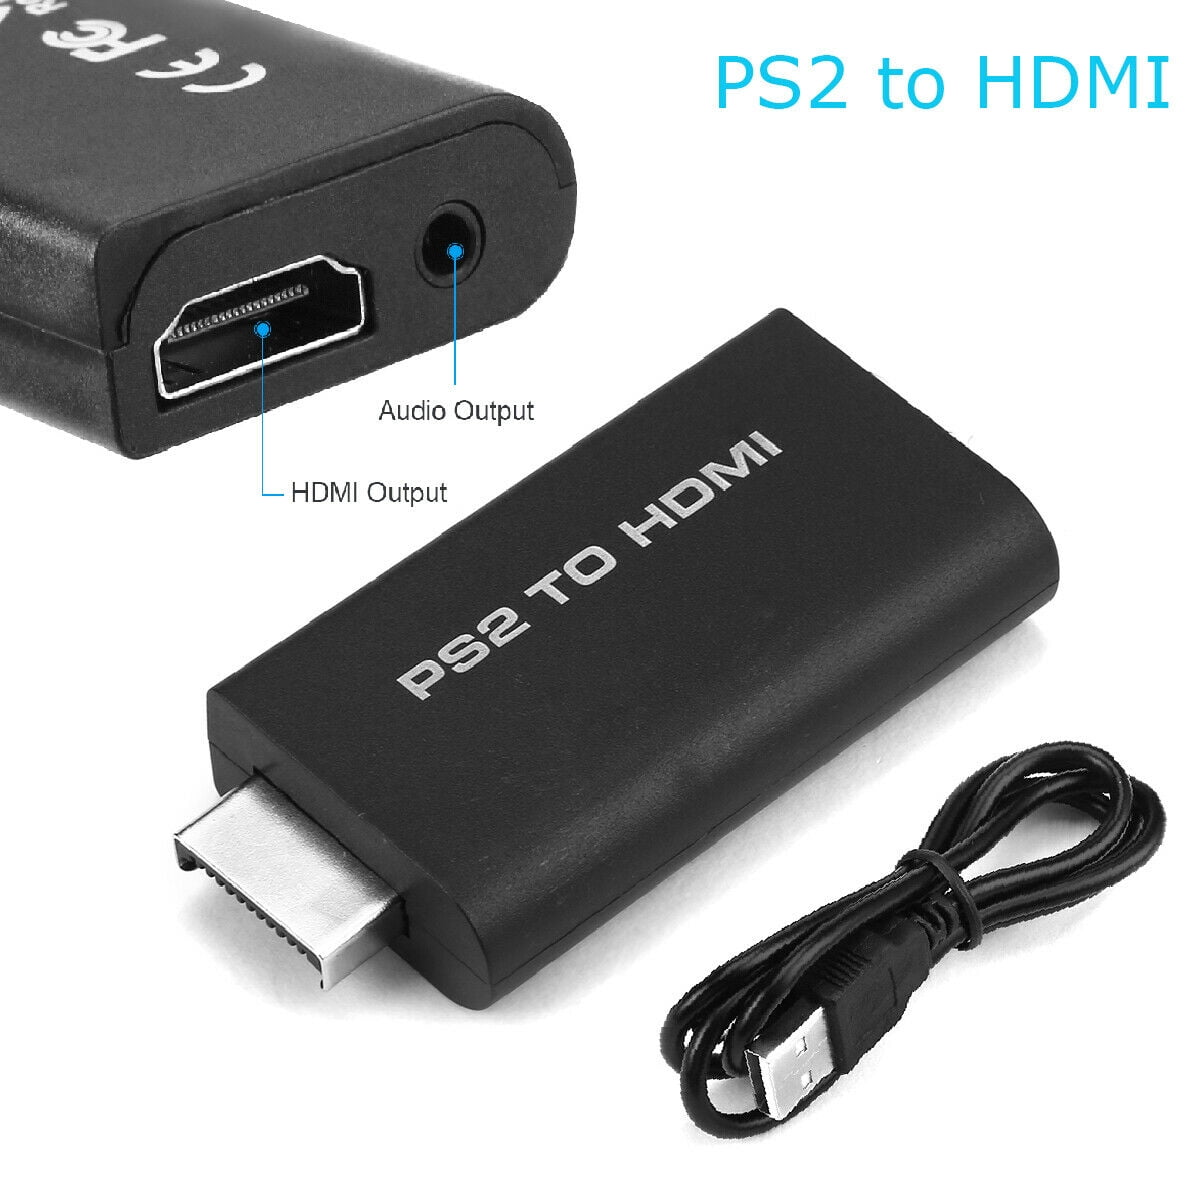 PS2 To HDMI Video Adapter PS2 Input Converter HDMI 3.5mm Audio Output für HDTV